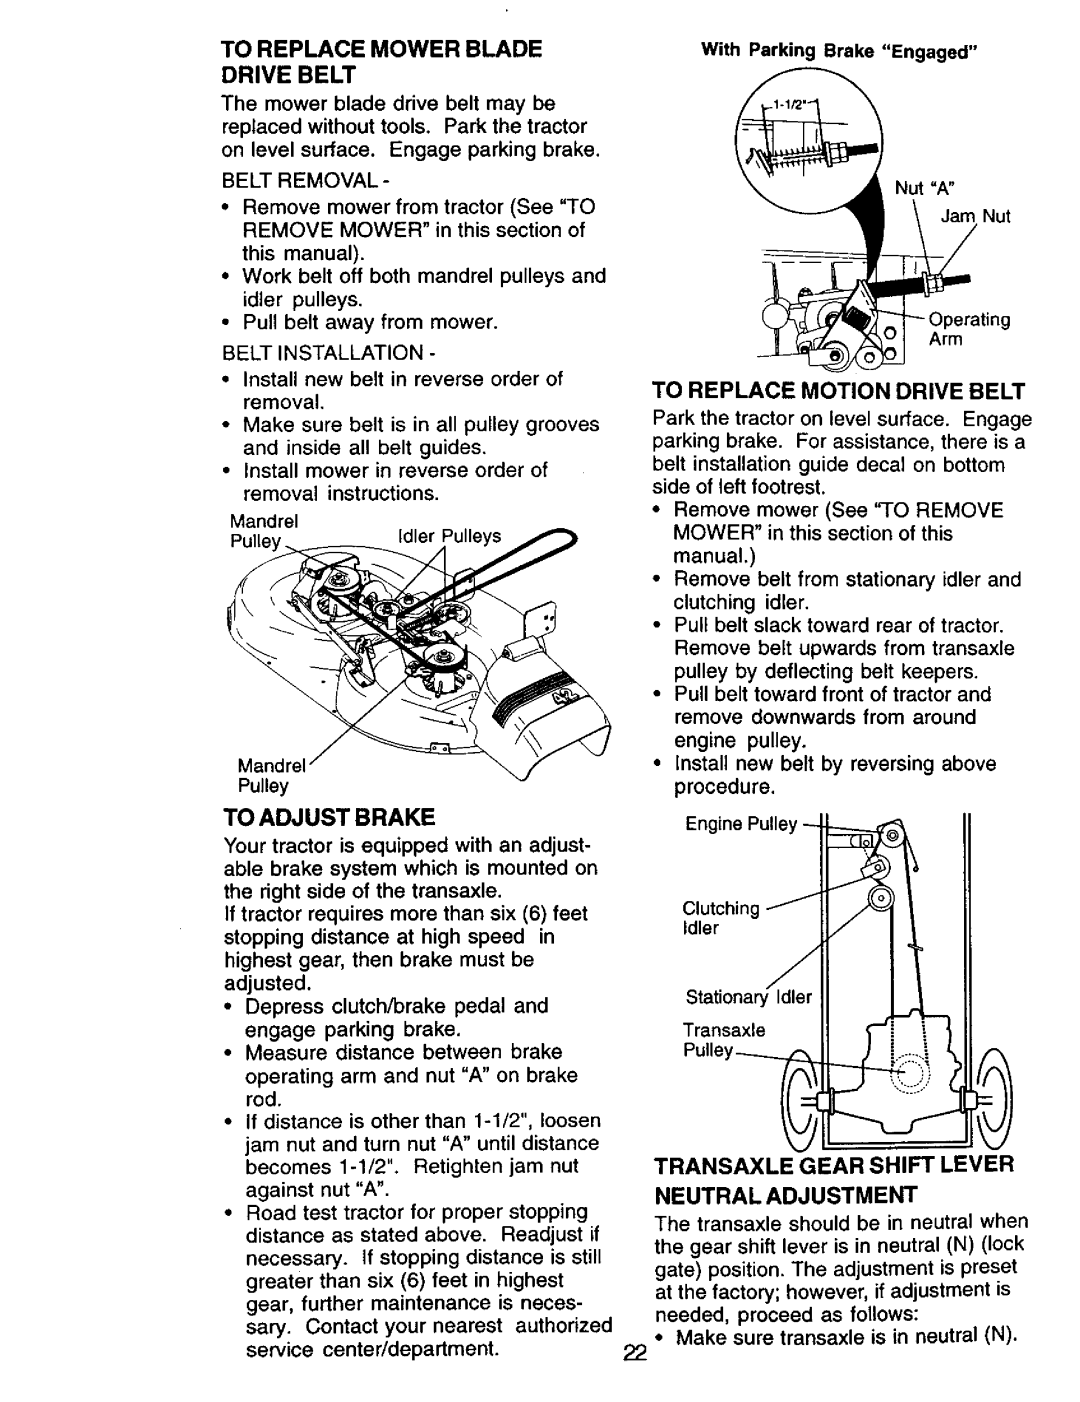 Craftsman 917.270732 owner manual To Adjust Brake, To Replace Mower Blade Drive Belt, To Replace Motion Drive Belt 